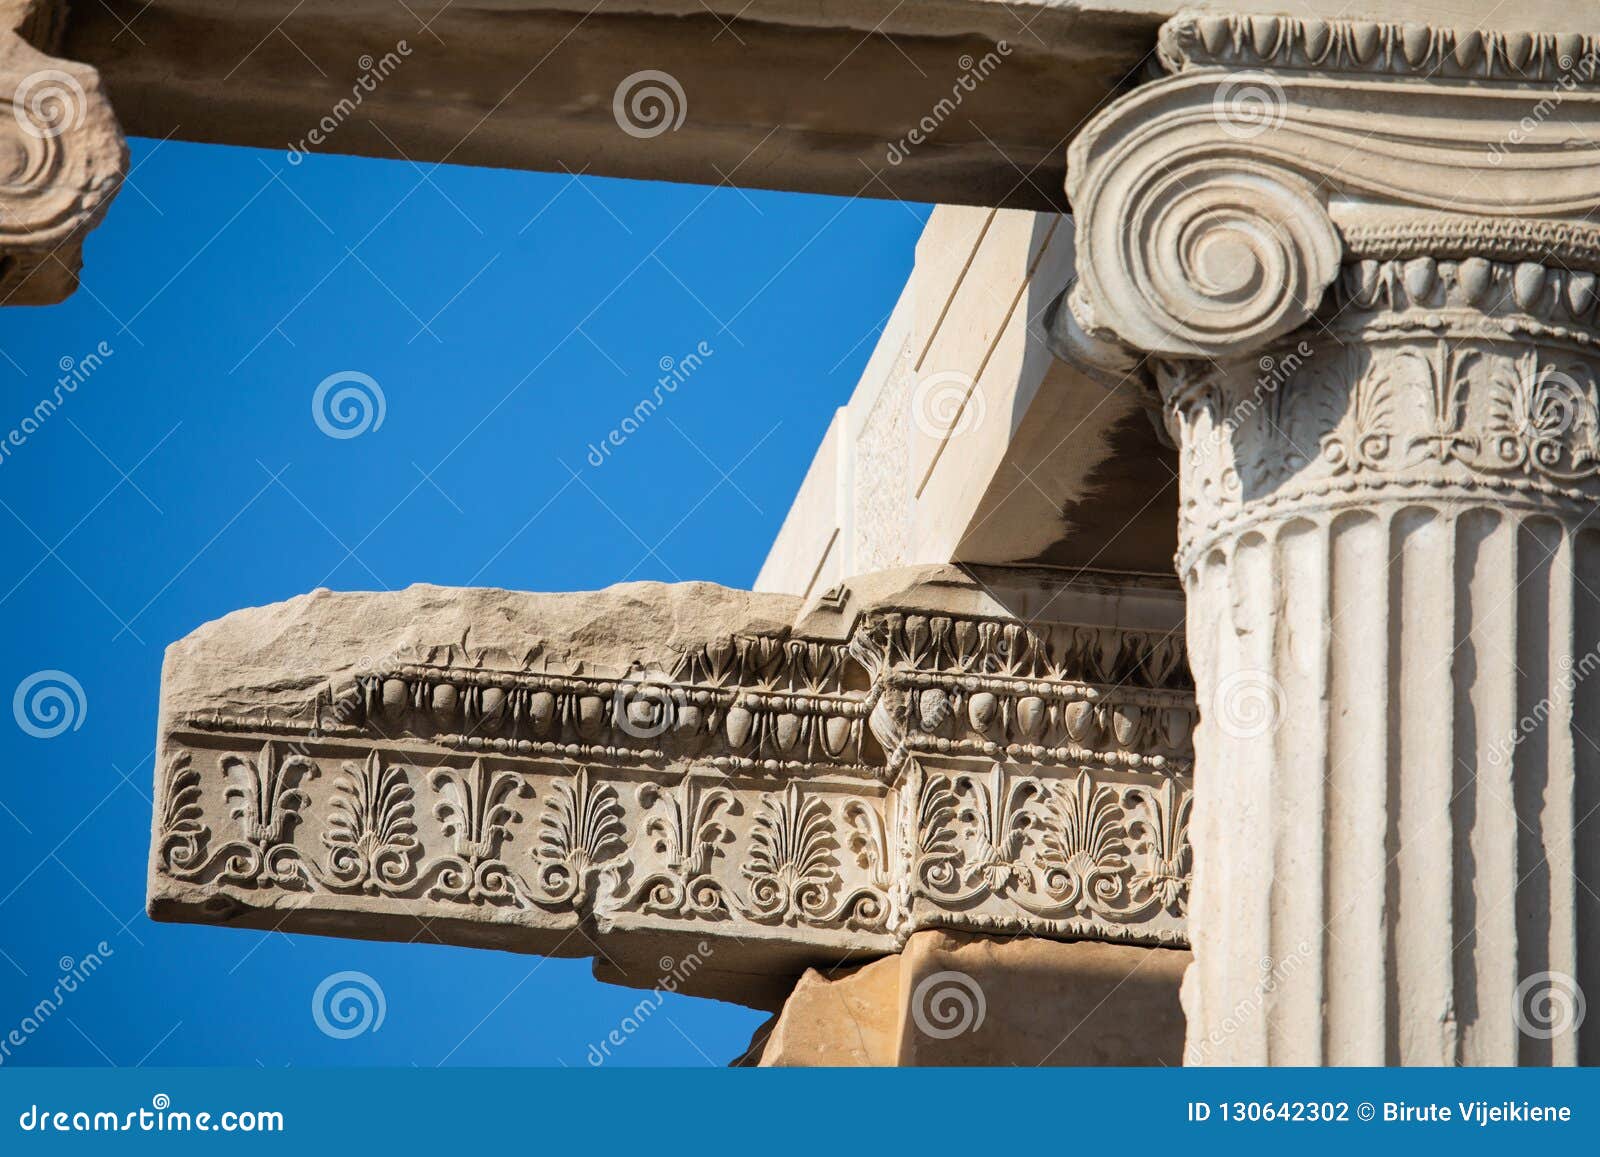 floral patterns at the erechtheion in athens